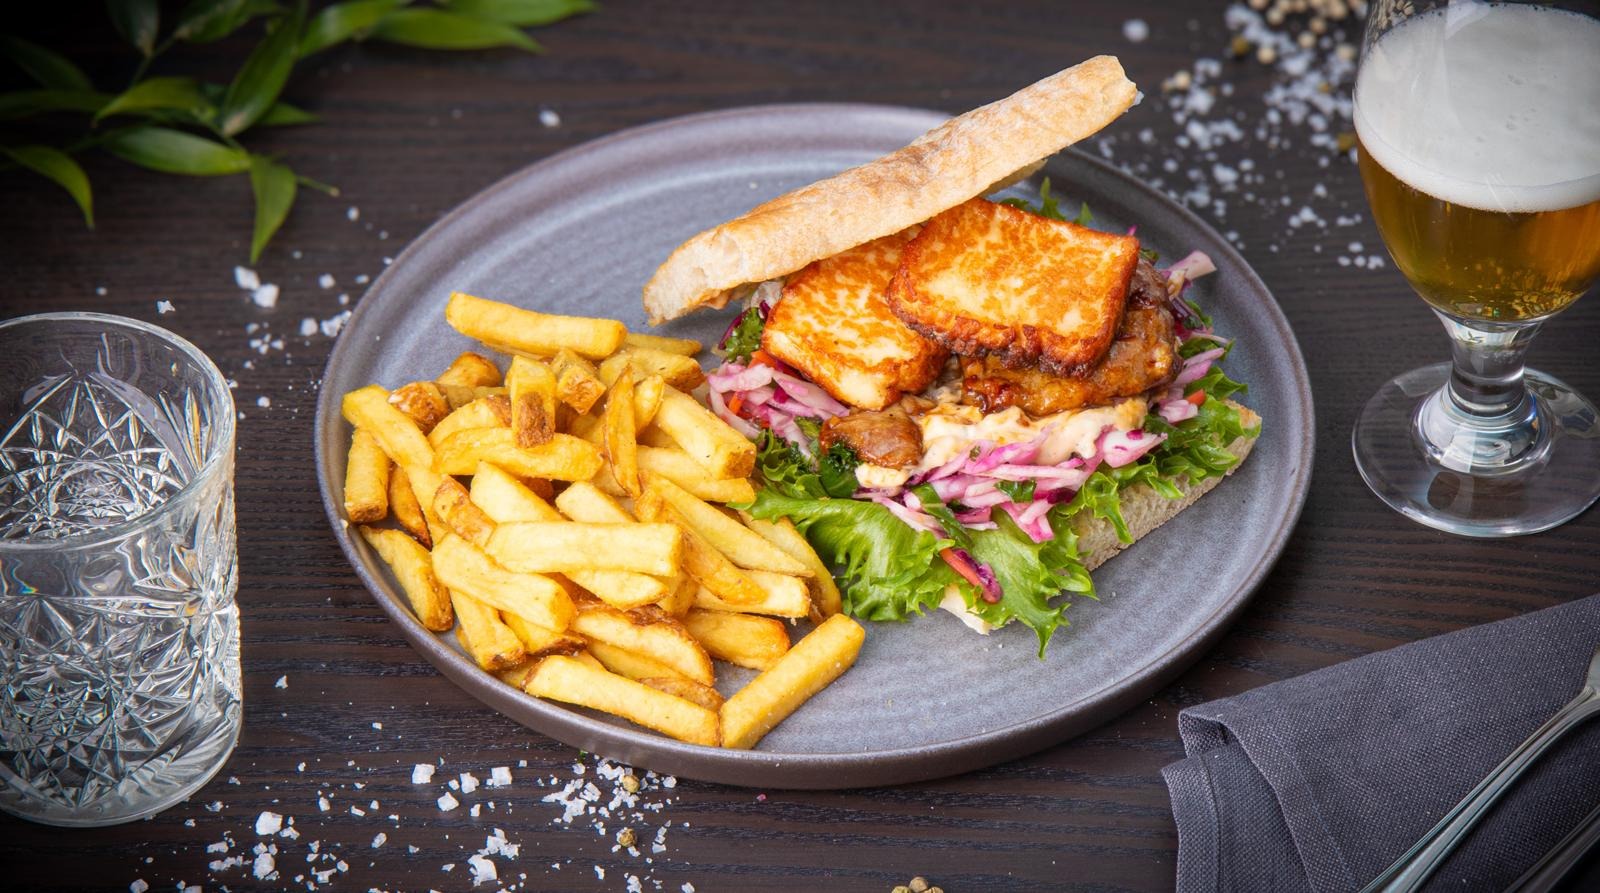 Chicken and halloumi sandwich, Bèarnaise mayonnaise with chili, coleslaw and country fries